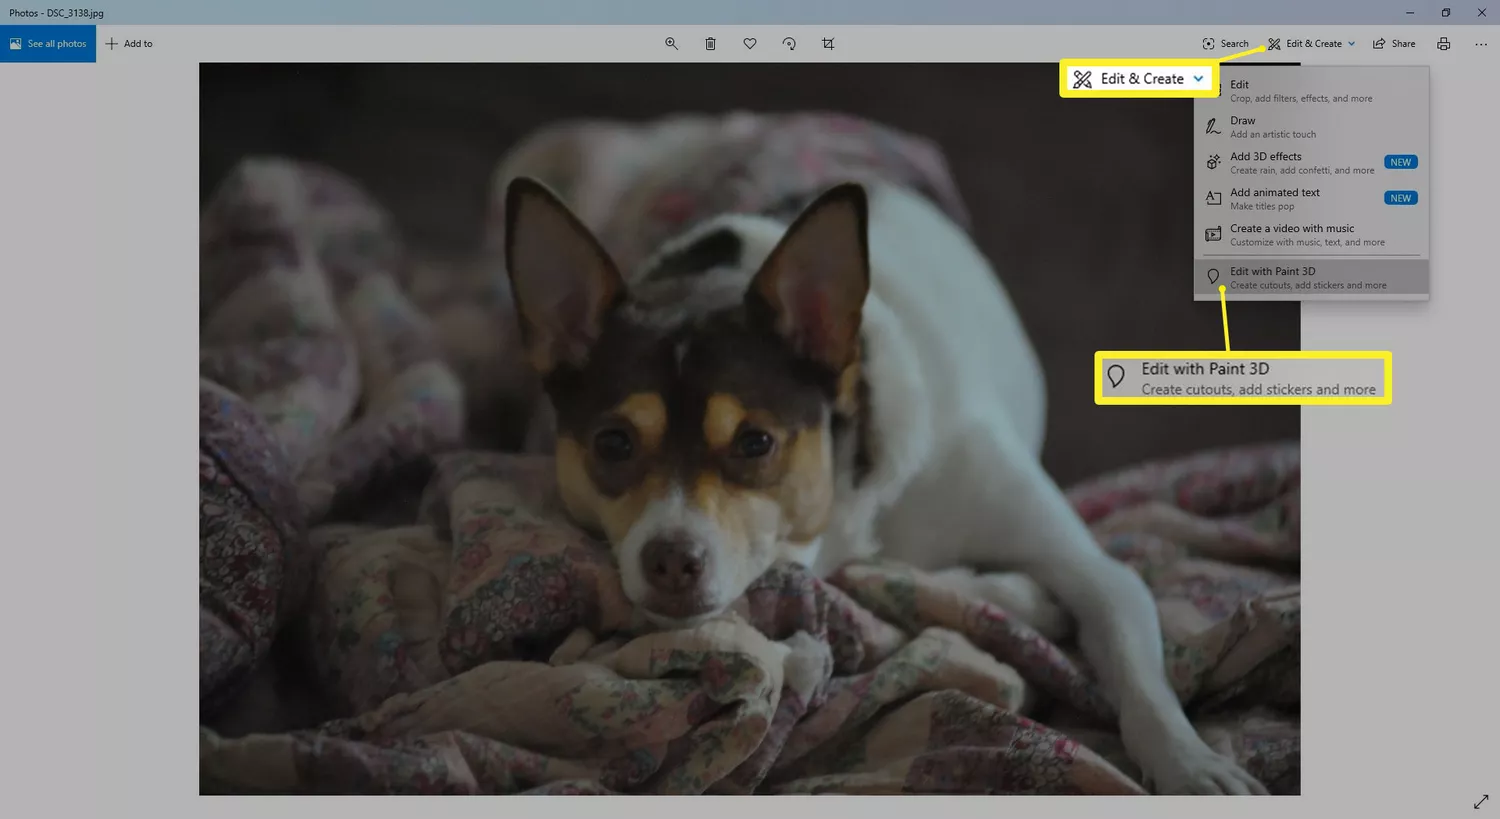 Selecting Create And Edit Options In Windows Photos